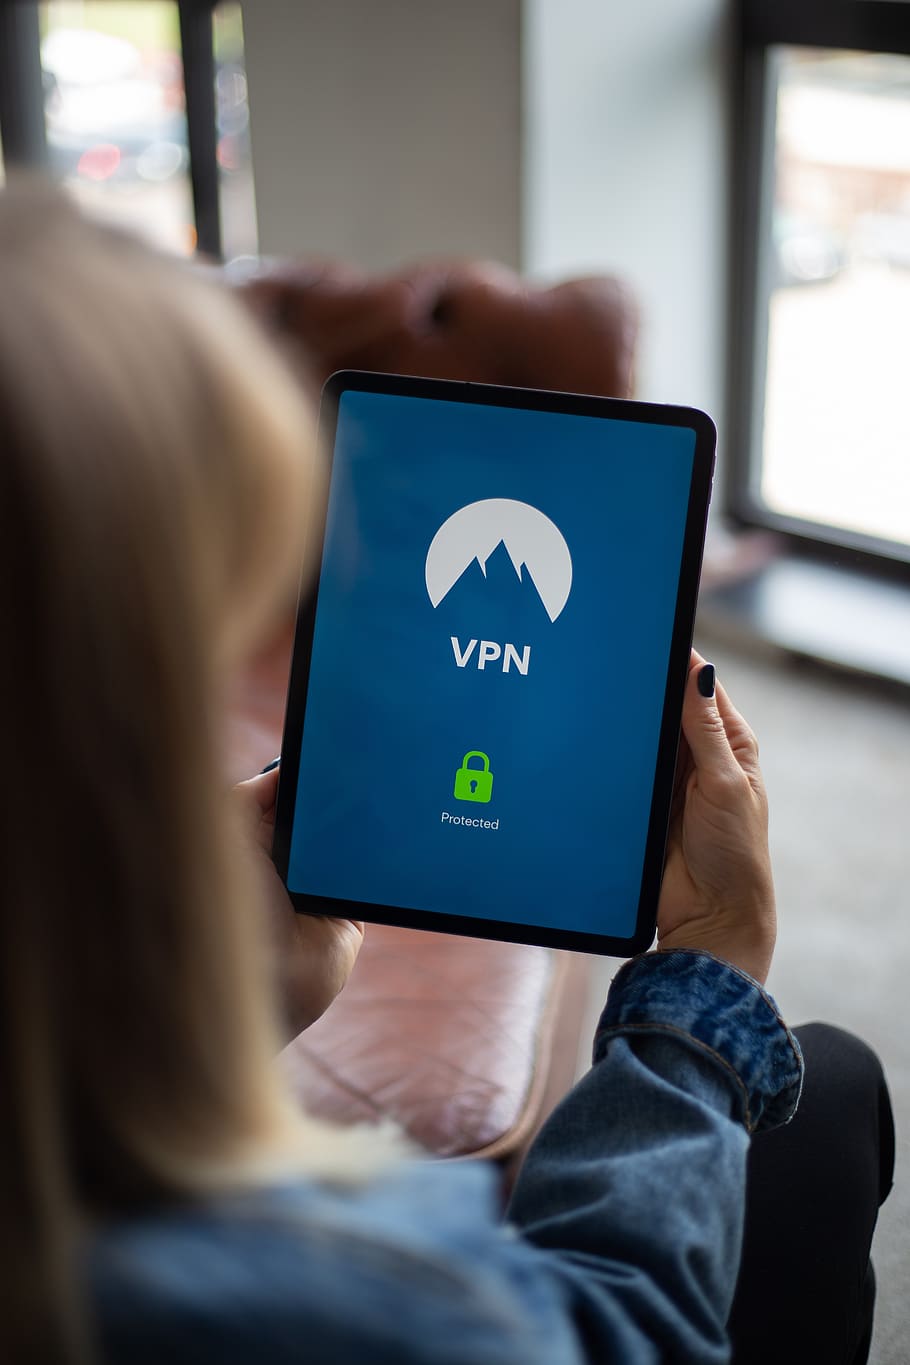 vpn, virtual private network, security, privacy, public wifi, internet, device, online, stock photos, stock